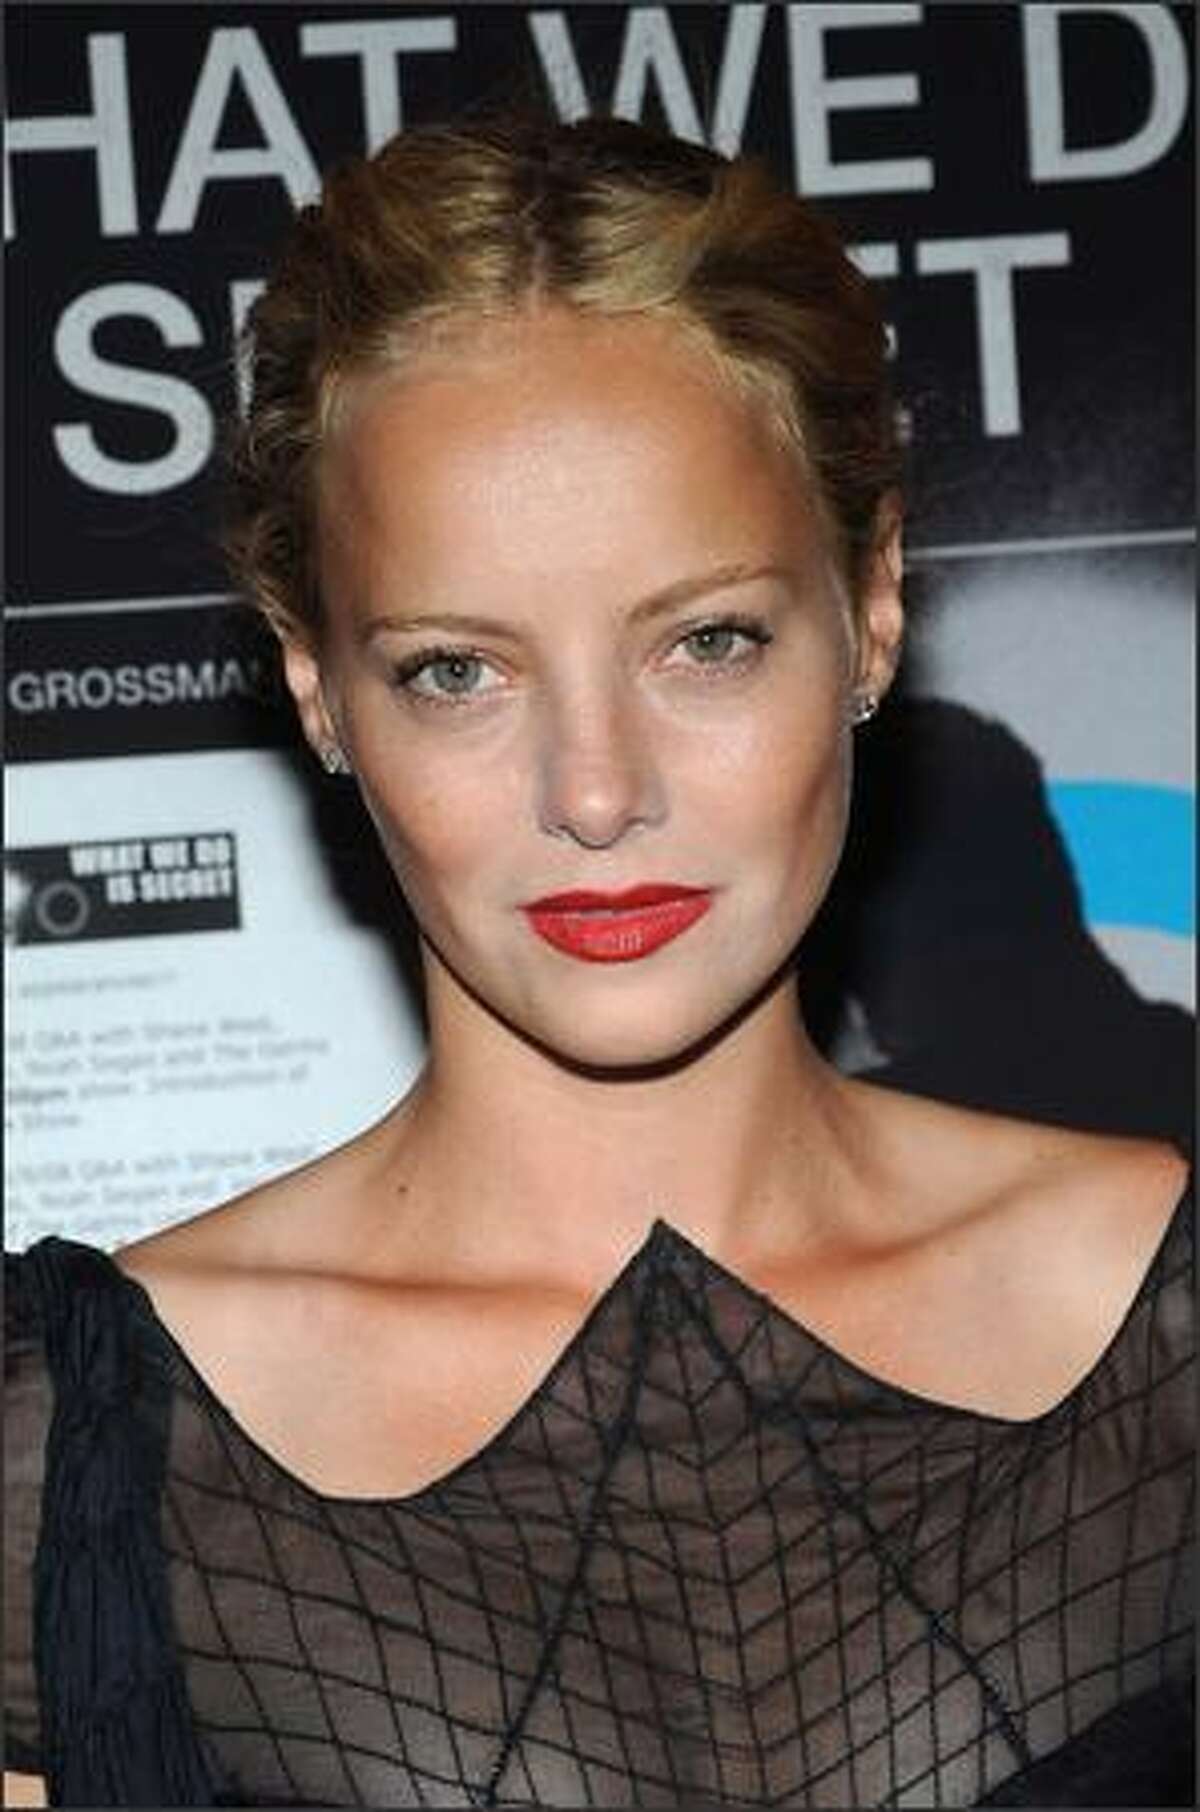 Actress Bijou Phillips attends the premiere Of "What We Do Is Secret" at the Landmark Sunshine Cinemas in New York City.